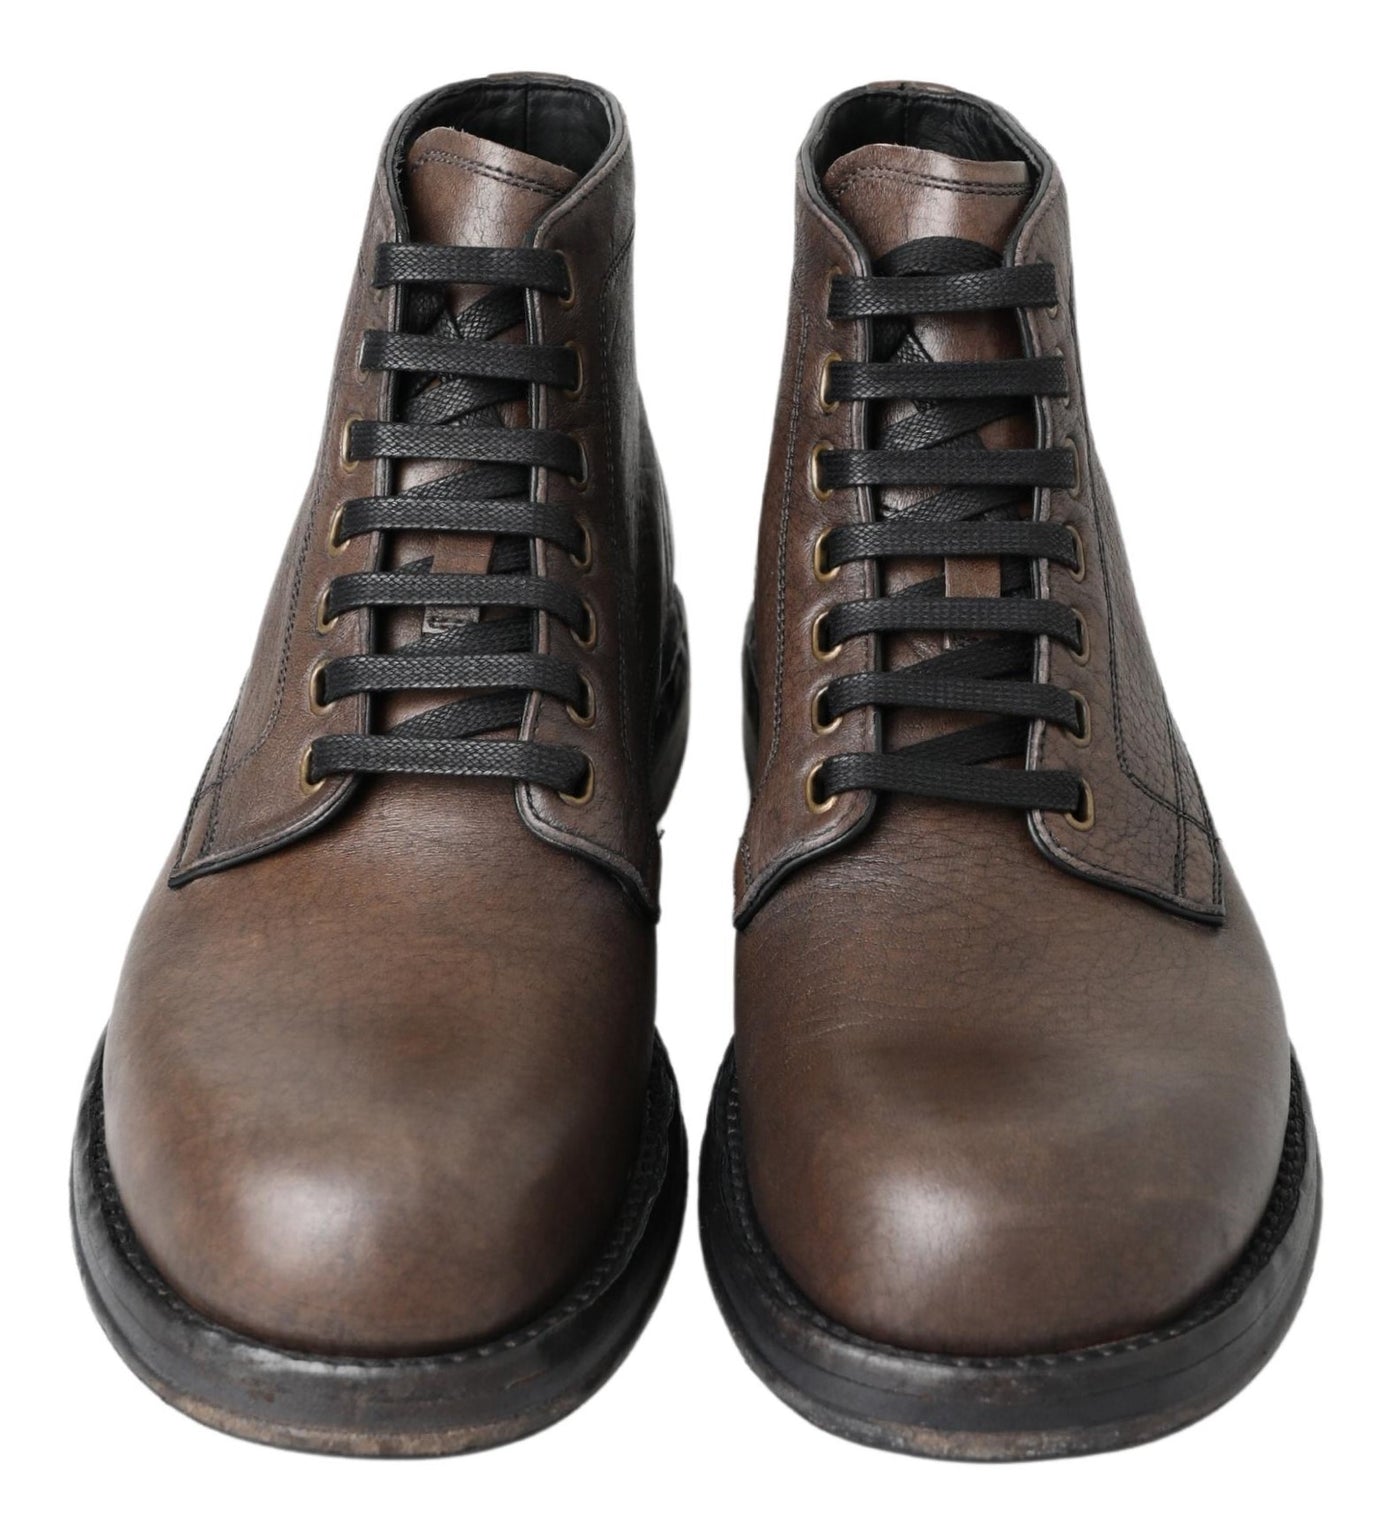 Dolce & Gabbana Brown Horse Leather Perugino Shoes